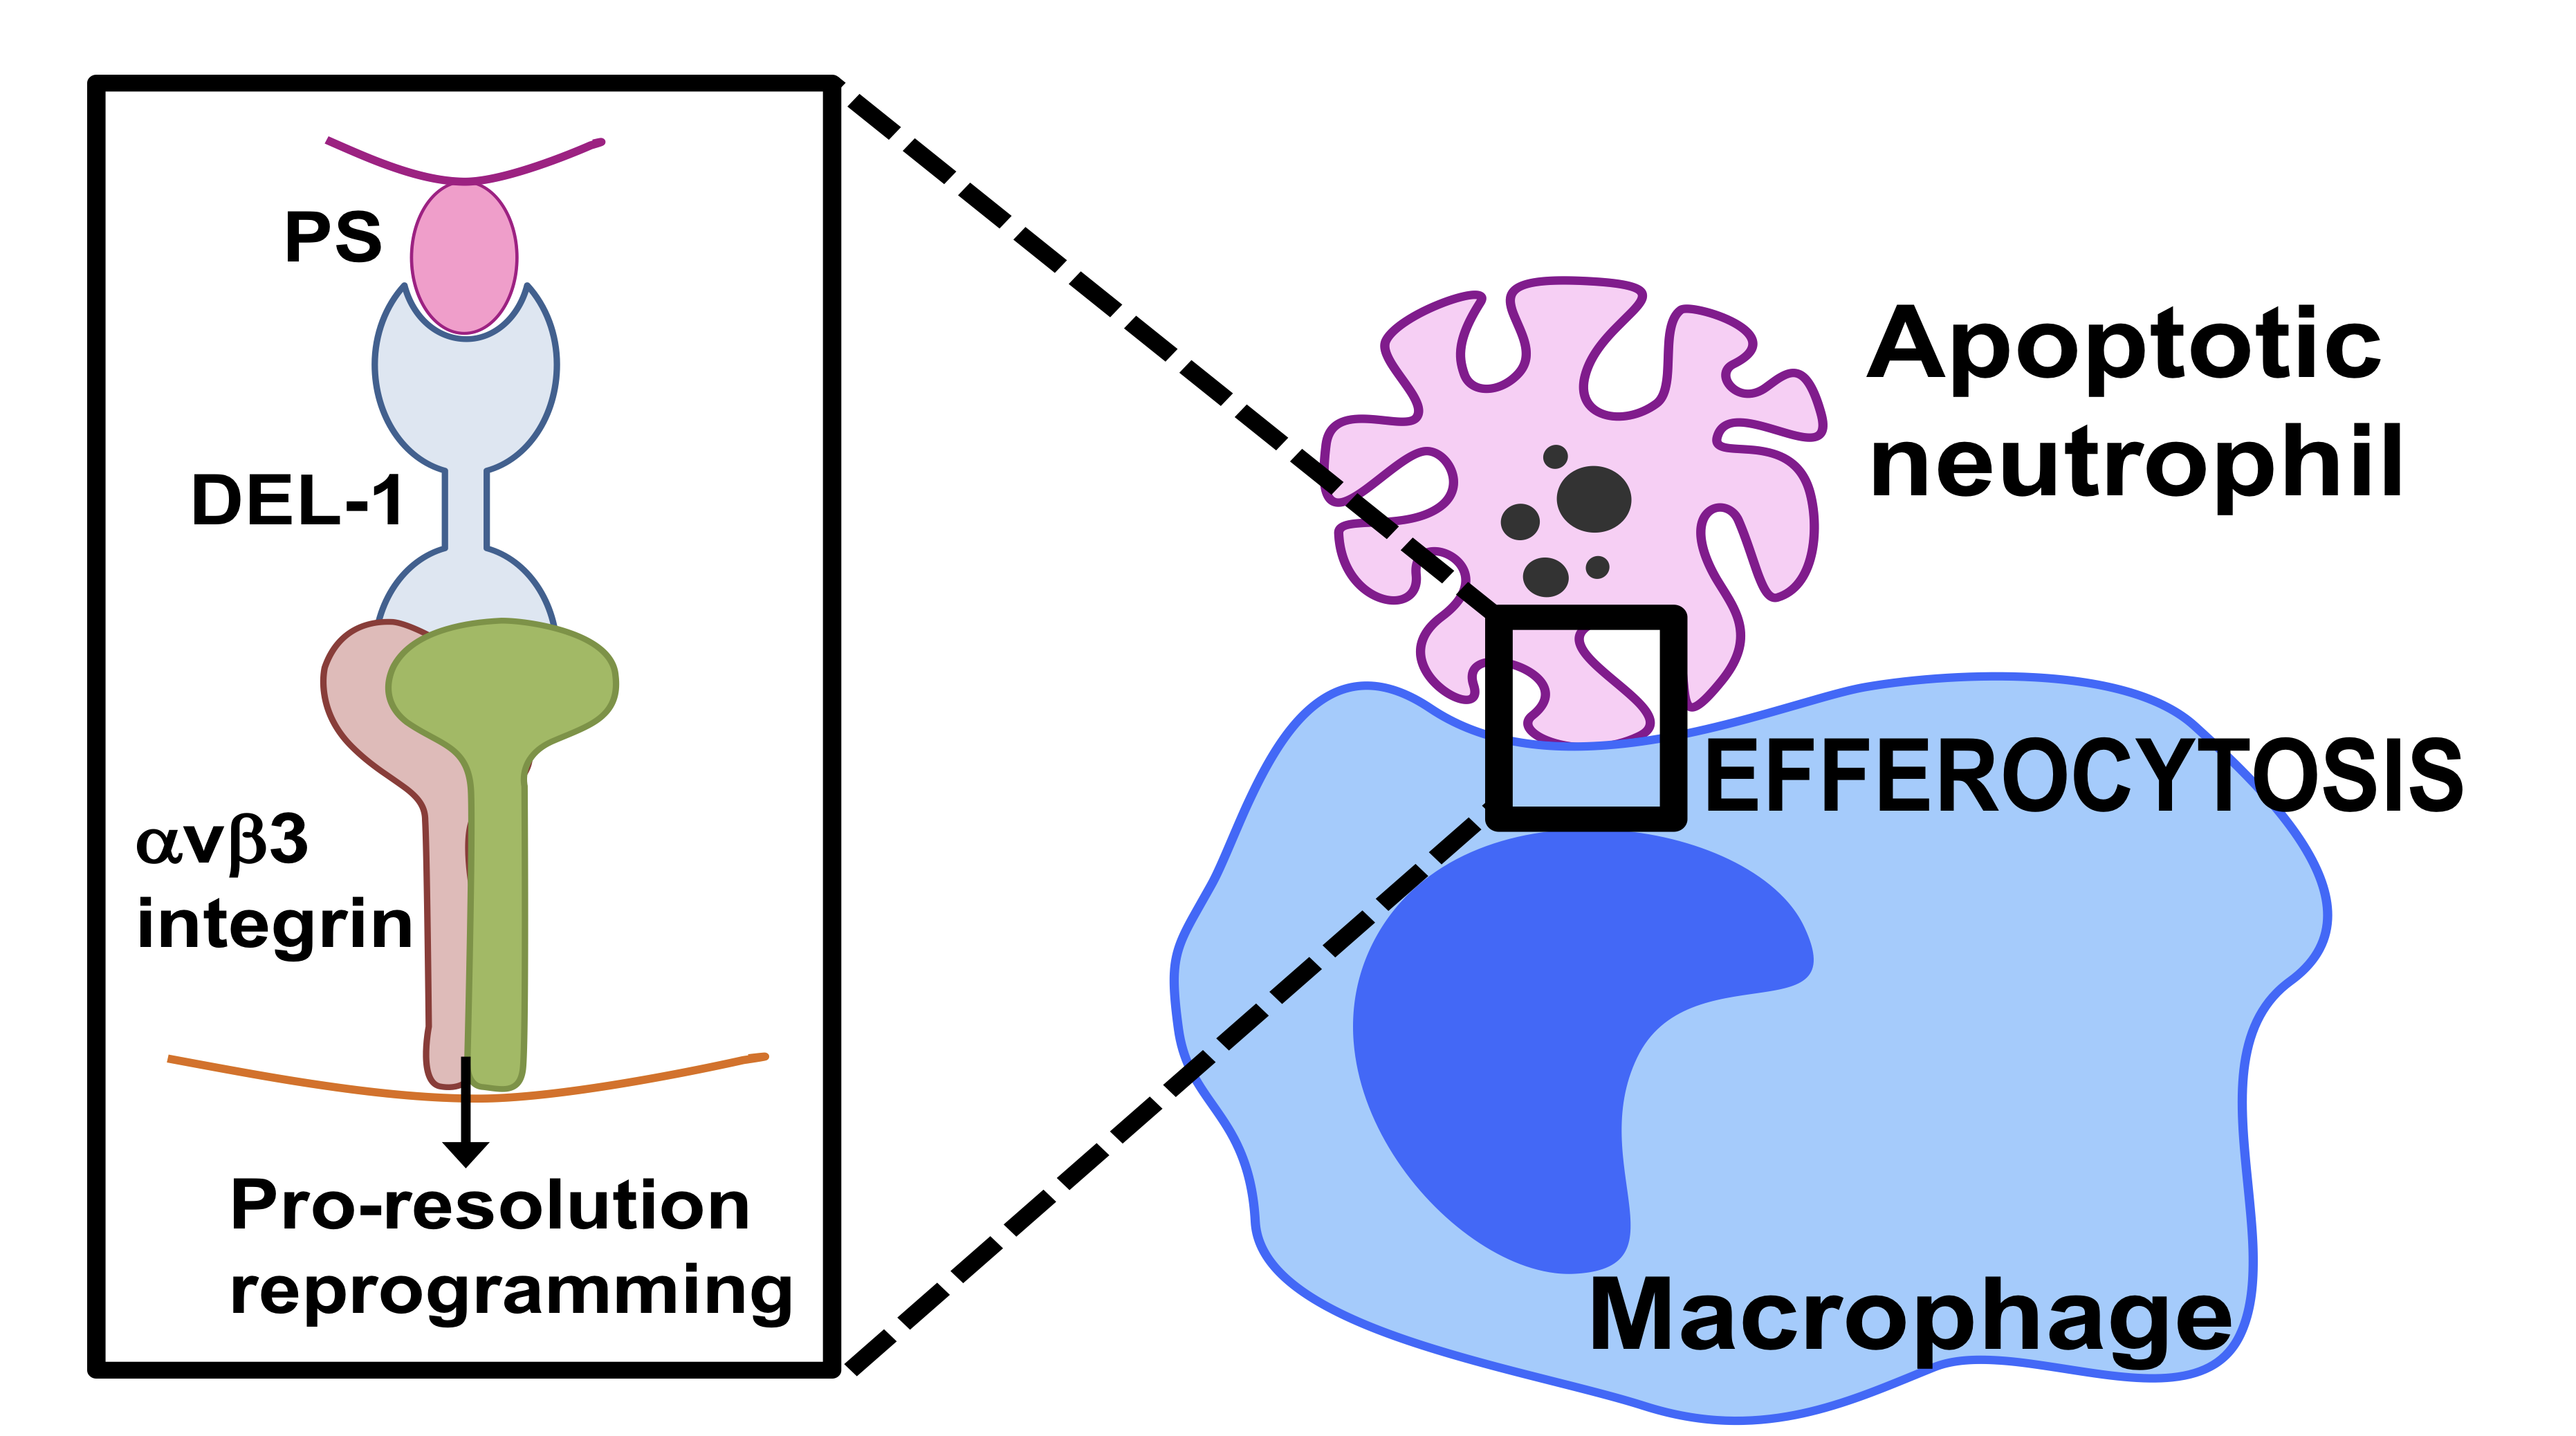 A diagram explains the action of the protein Del-1 and macrophages